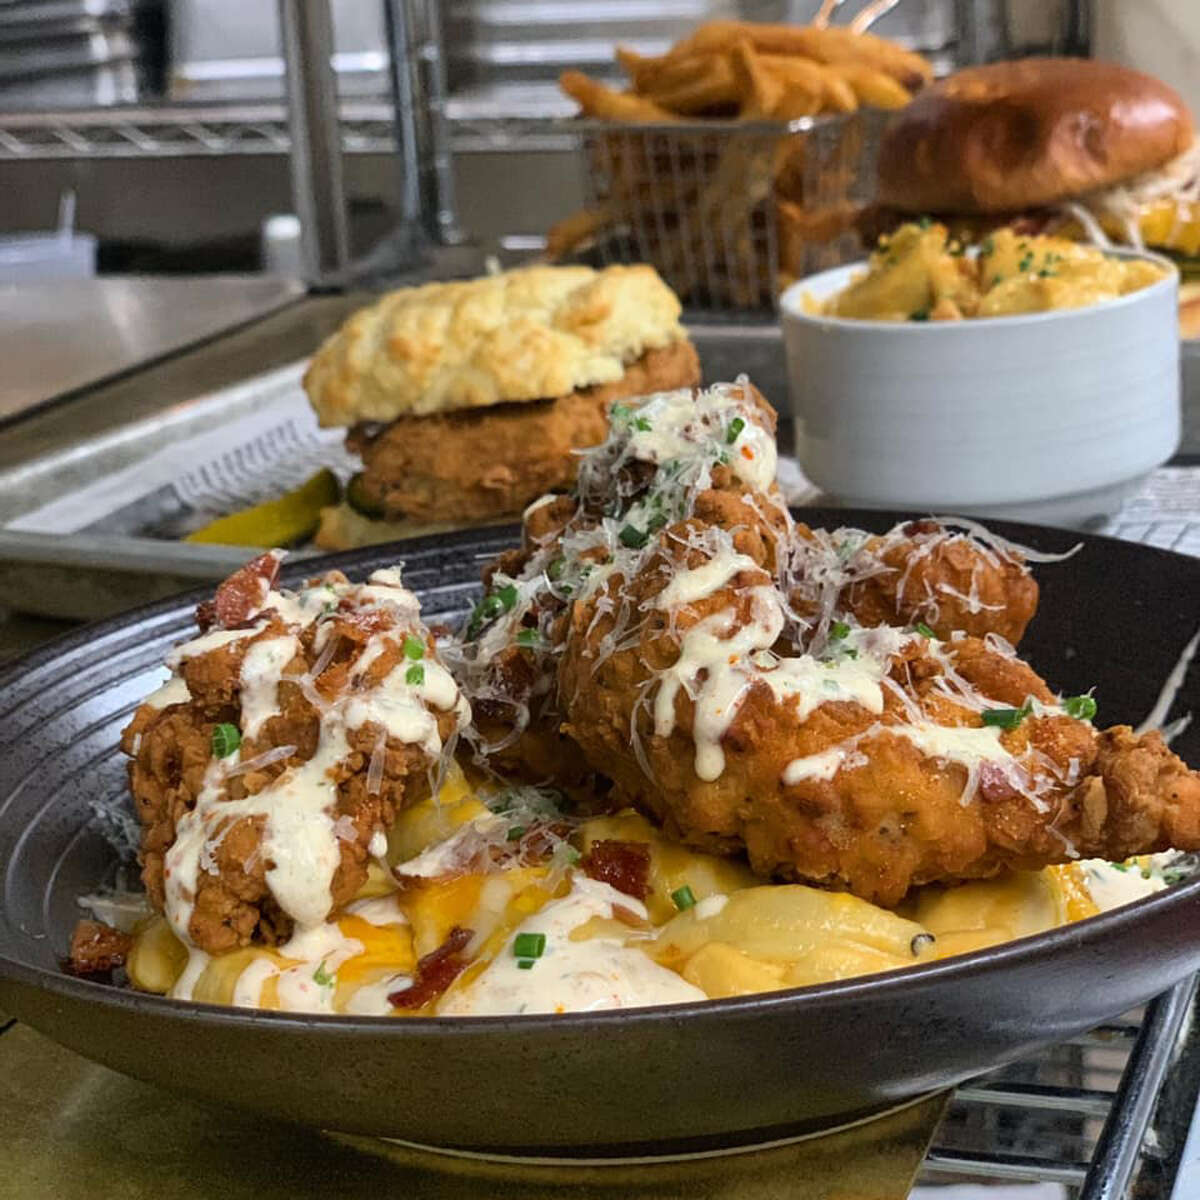 Among the new items on the lunch menu at The Cuckoo's Nest in Albany are Soul Bowls, with a base of mac-n-cheese or gritts and toppings including fried chicken strips, pulled pork or Coca-Cola-braised short ribs. (Provided photo.)